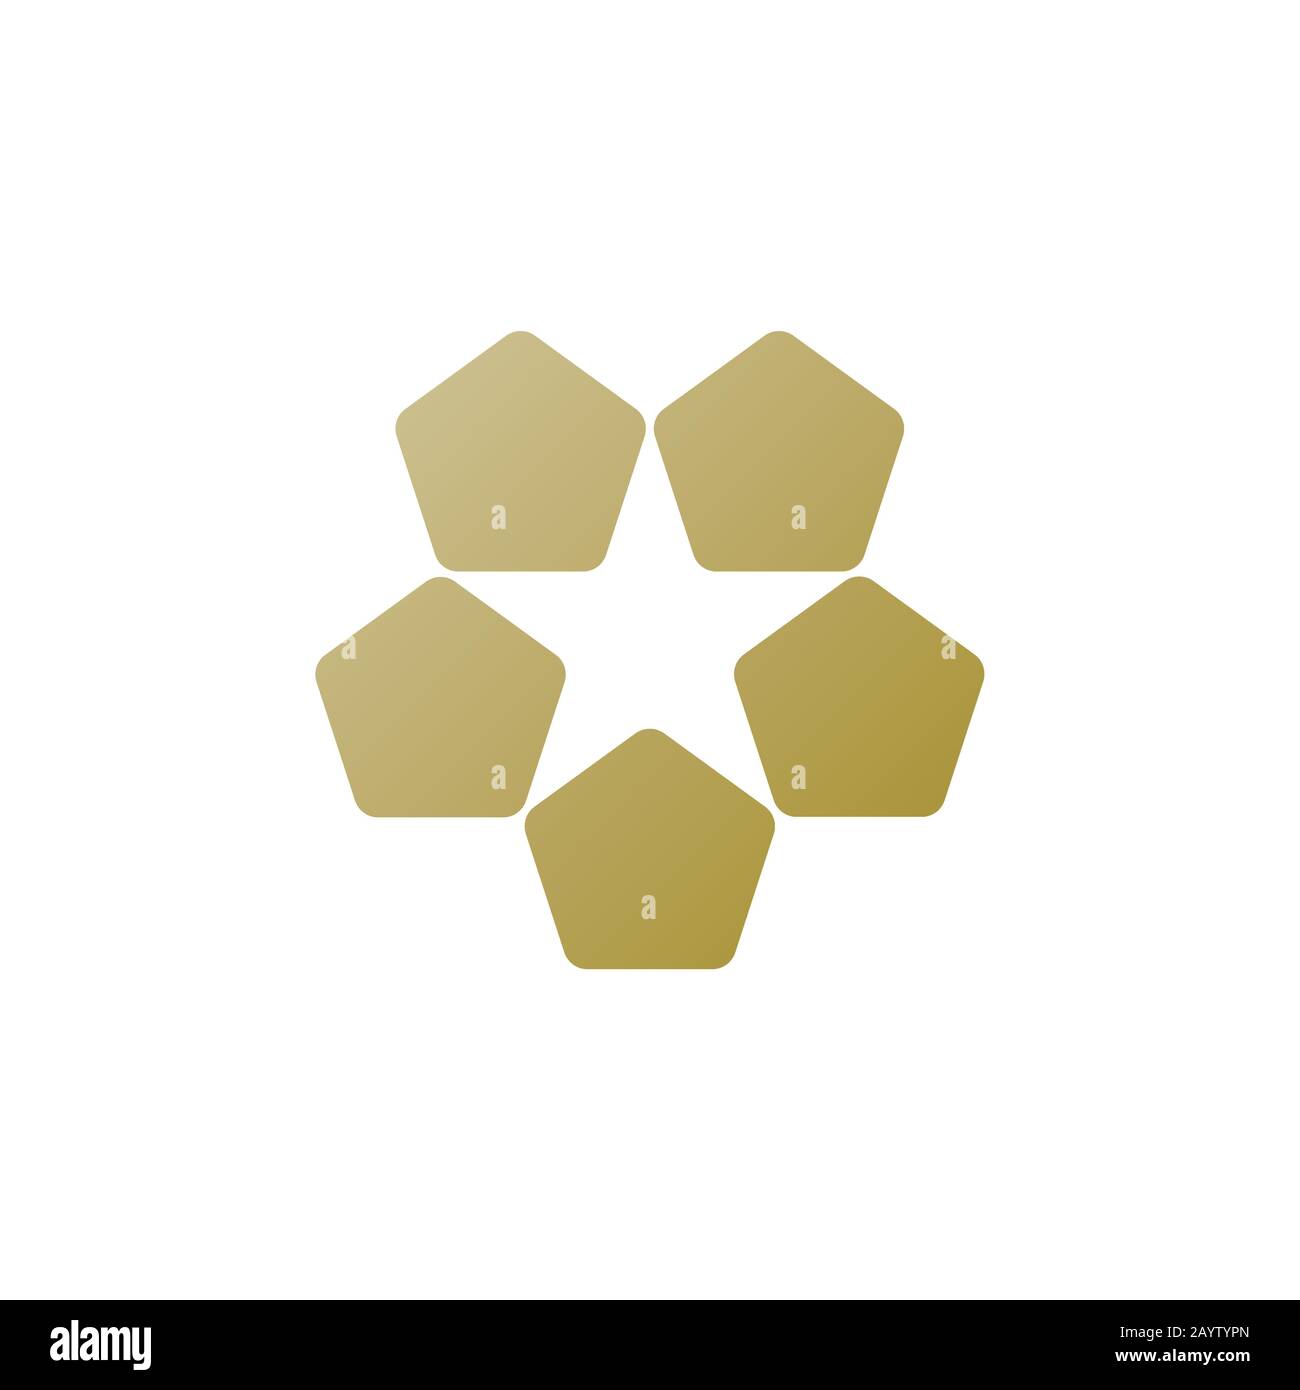 5 Pentagons making 1 star icon Stock Vector